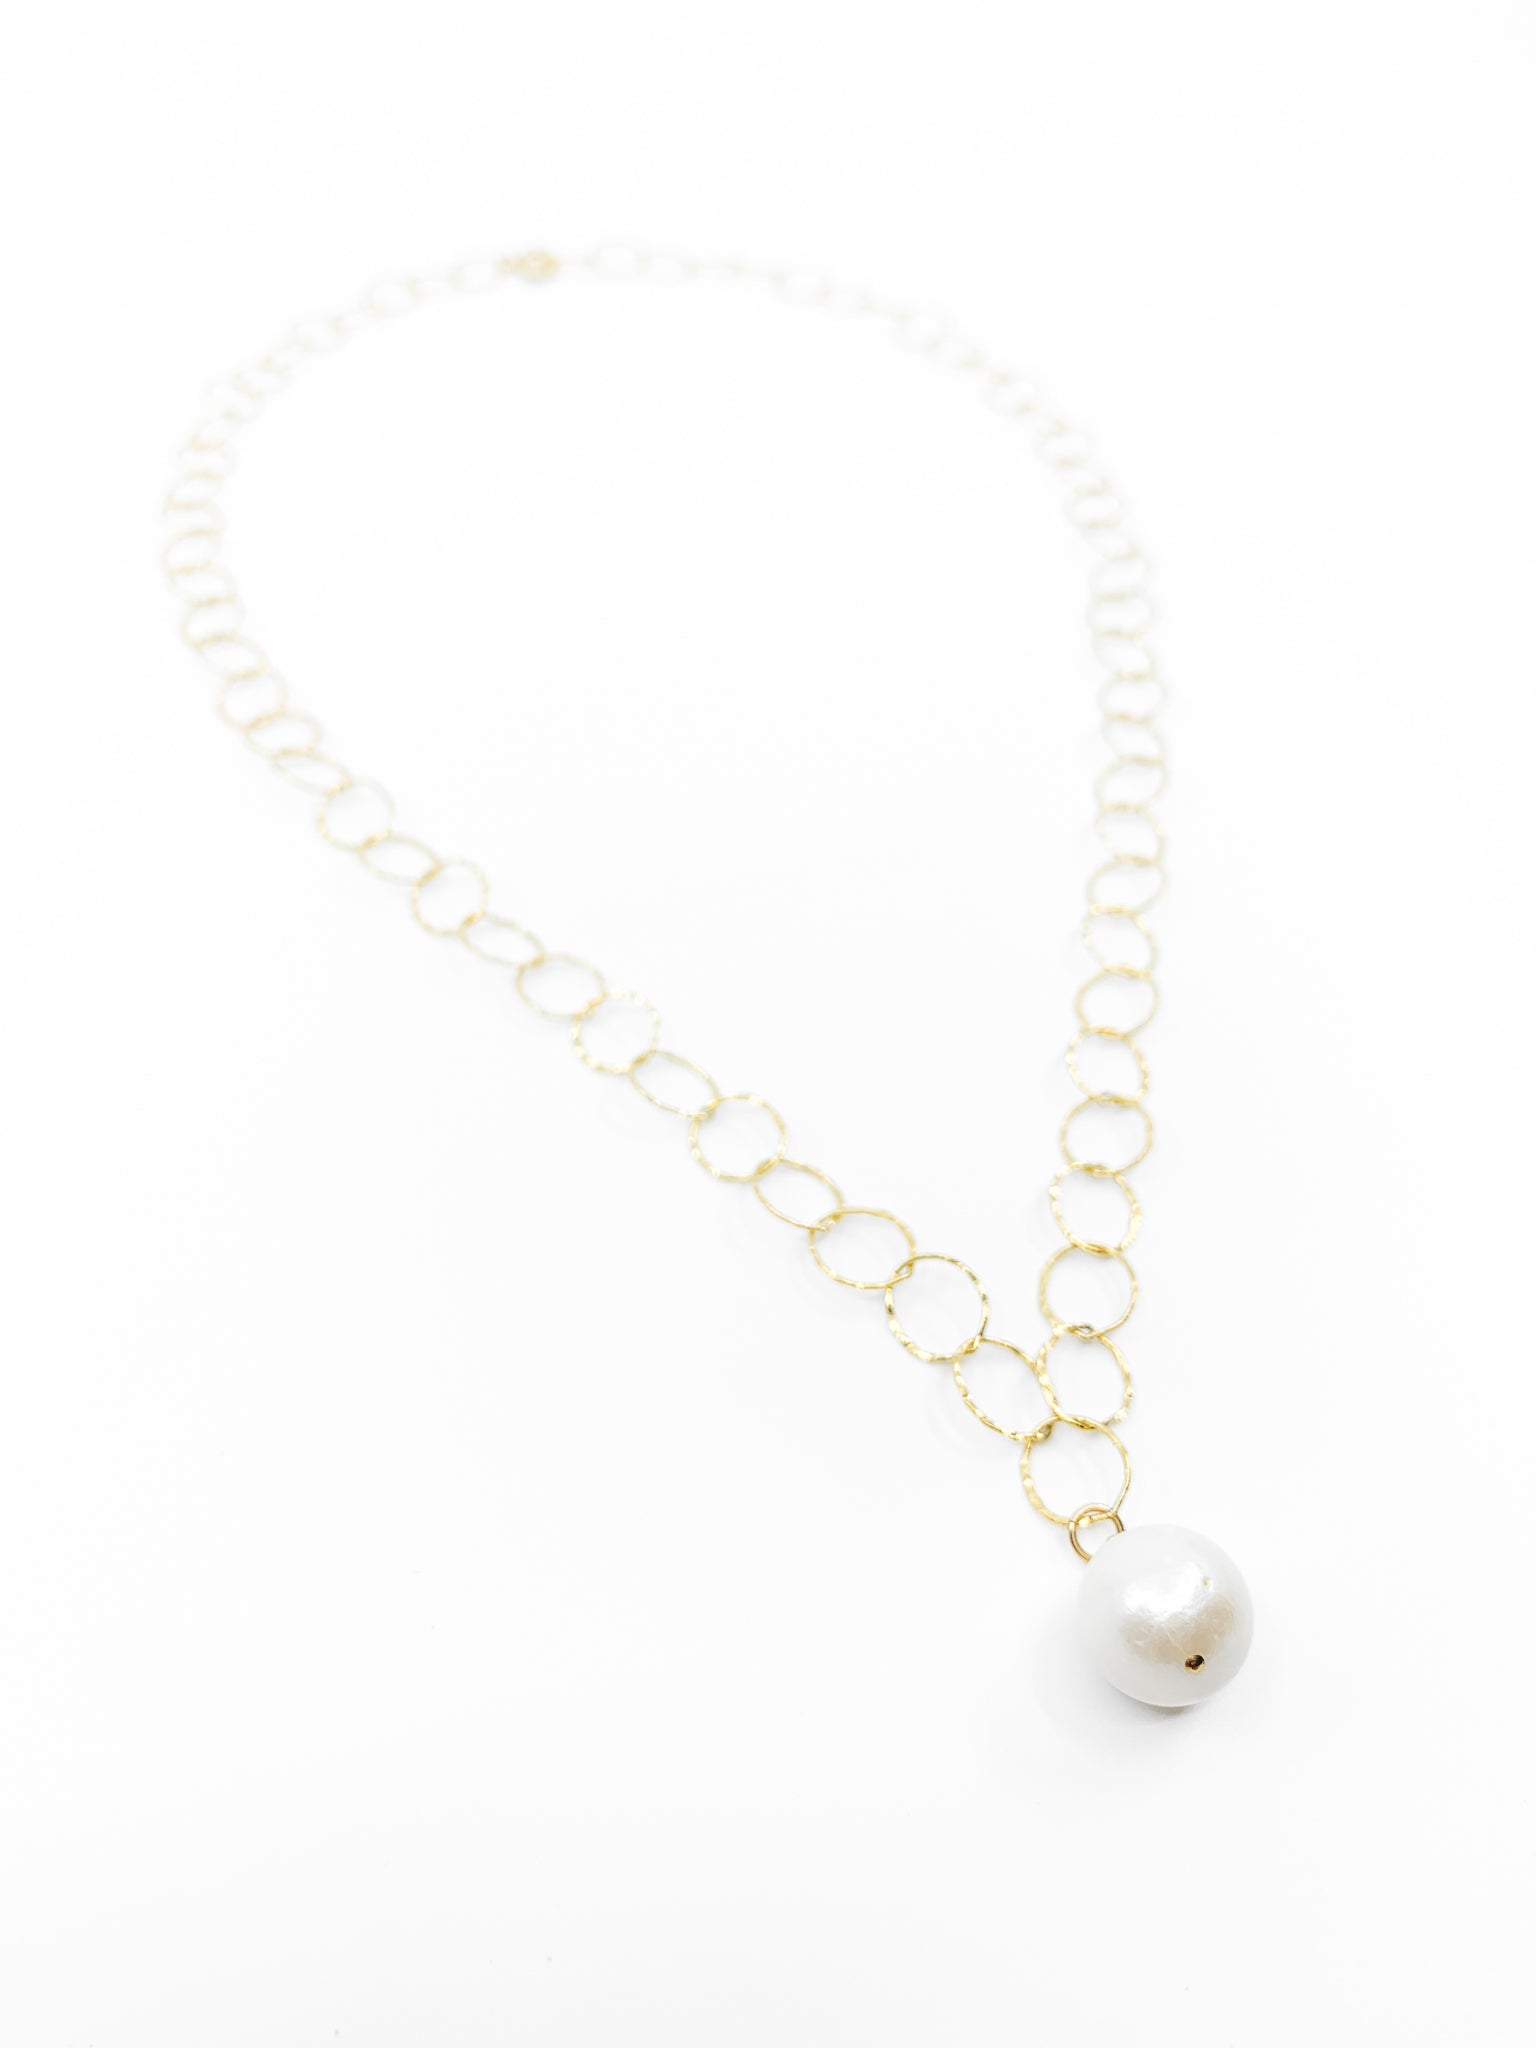 white pearl round gold chain necklace by eve black jewelry made in Hawaii